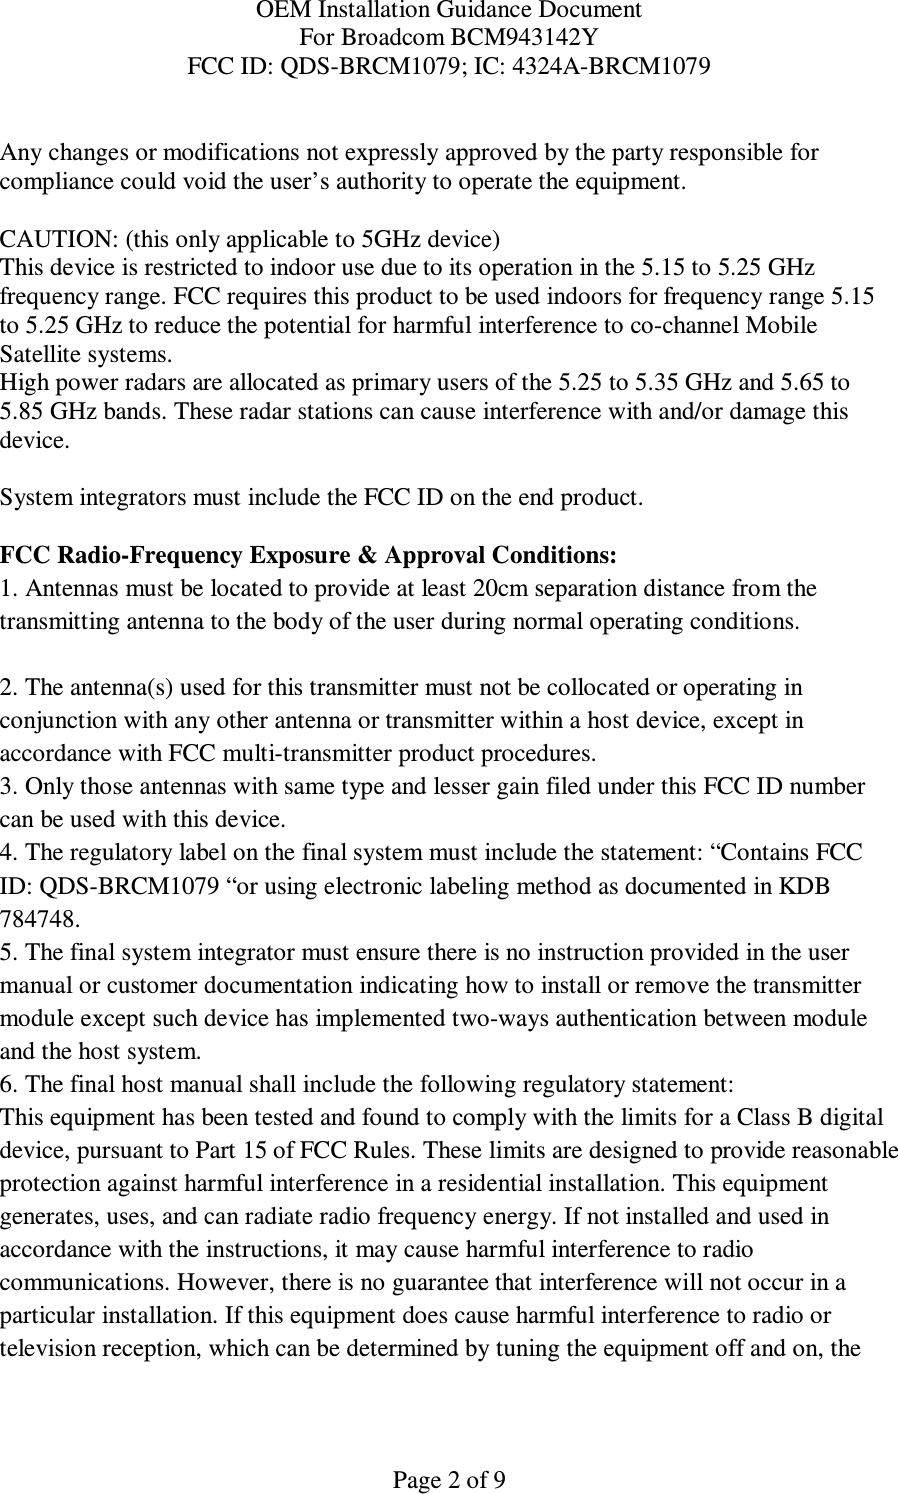 OEM Installation Guidance Document For Broadcom BCM943142Y FCC ID: QDS-BRCM1079; IC: 4324A-BRCM1079  Page 2 of 9  Any changes or modifications not expressly approved by the party responsible for compliance could void the user’s authority to operate the equipment.  CAUTION: (this only applicable to 5GHz device) This device is restricted to indoor use due to its operation in the 5.15 to 5.25 GHz frequency range. FCC requires this product to be used indoors for frequency range 5.15 to 5.25 GHz to reduce the potential for harmful interference to co-channel Mobile Satellite systems. High power radars are allocated as primary users of the 5.25 to 5.35 GHz and 5.65 to 5.85 GHz bands. These radar stations can cause interference with and/or damage this device.  System integrators must include the FCC ID on the end product.   FCC Radio-Frequency Exposure &amp; Approval Conditions: 1. Antennas must be located to provide at least 20cm separation distance from the transmitting antenna to the body of the user during normal operating conditions.  2. The antenna(s) used for this transmitter must not be collocated or operating in conjunction with any other antenna or transmitter within a host device, except in accordance with FCC multi-transmitter product procedures. 3. Only those antennas with same type and lesser gain filed under this FCC ID number can be used with this device. 4. The regulatory label on the final system must include the statement: “Contains FCC ID: QDS-BRCM1079 “or using electronic labeling method as documented in KDB 784748. 5. The final system integrator must ensure there is no instruction provided in the user manual or customer documentation indicating how to install or remove the transmitter module except such device has implemented two-ways authentication between module and the host system. 6. The final host manual shall include the following regulatory statement: This equipment has been tested and found to comply with the limits for a Class B digital device, pursuant to Part 15 of FCC Rules. These limits are designed to provide reasonable protection against harmful interference in a residential installation. This equipment generates, uses, and can radiate radio frequency energy. If not installed and used in accordance with the instructions, it may cause harmful interference to radio communications. However, there is no guarantee that interference will not occur in a particular installation. If this equipment does cause harmful interference to radio or television reception, which can be determined by tuning the equipment off and on, the 